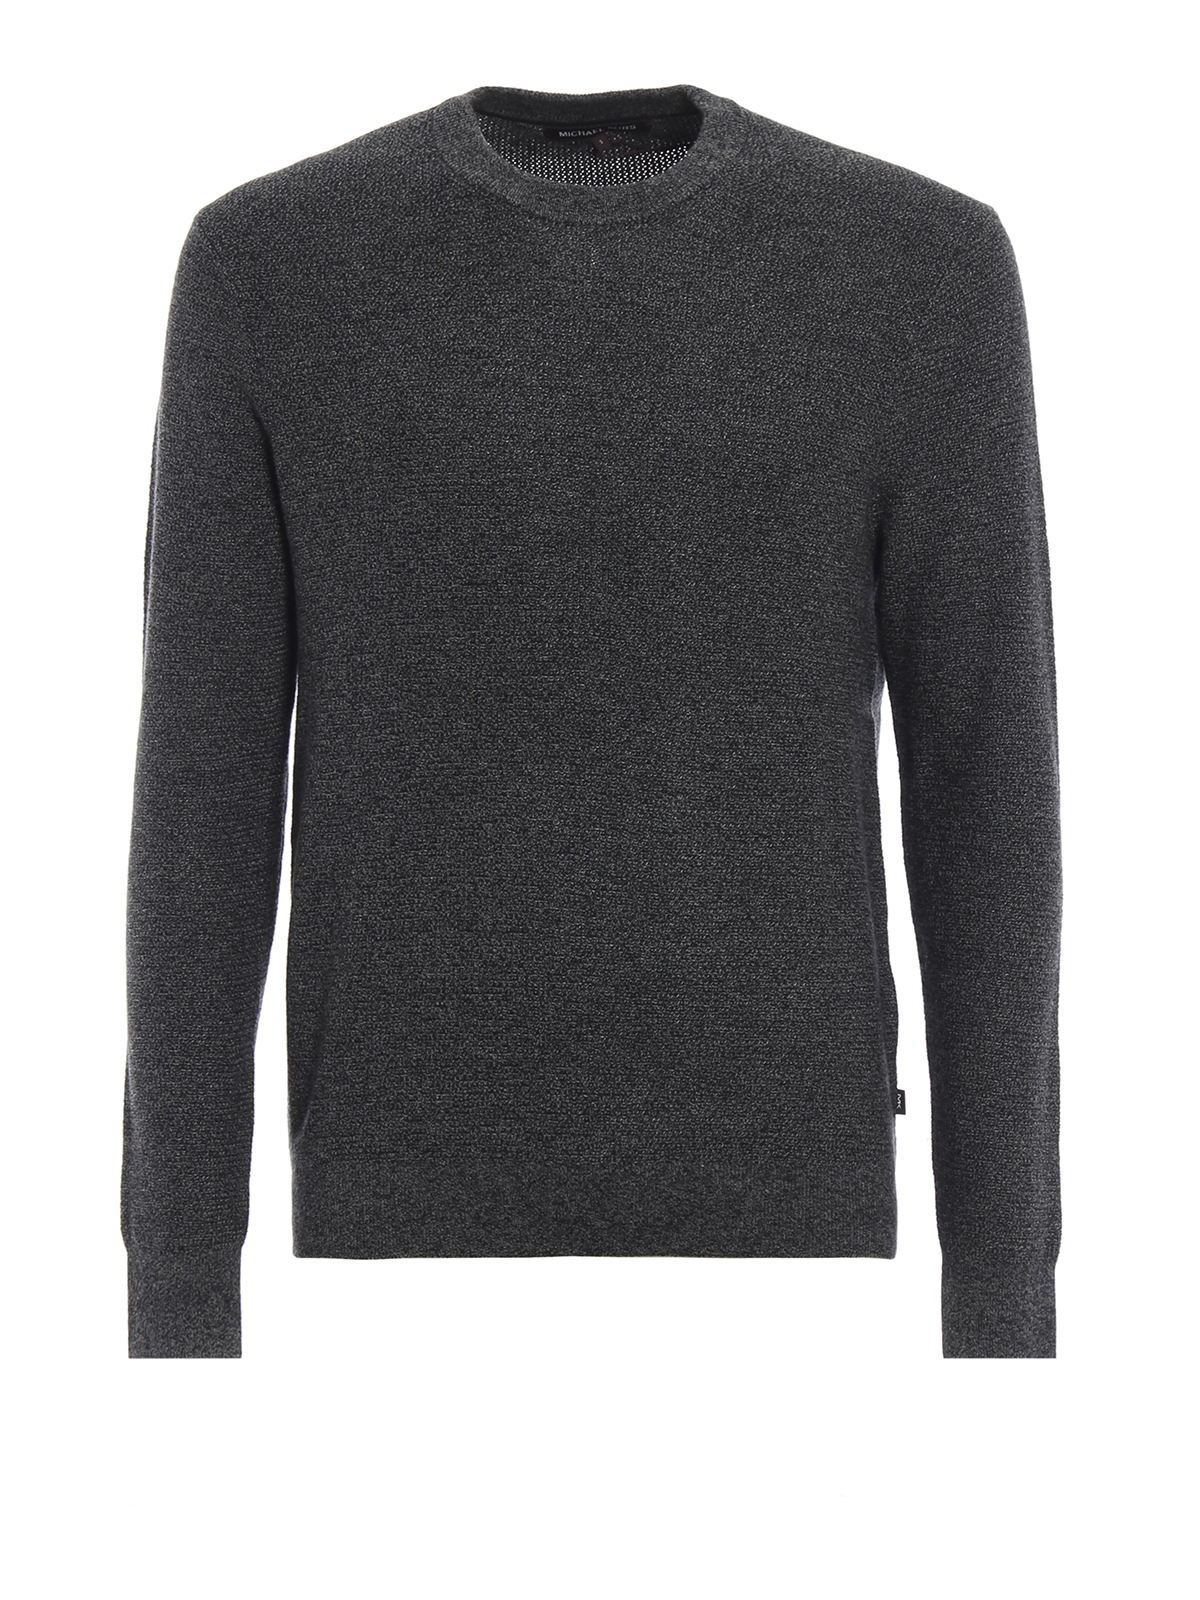 Michael Kors Ash Grey Soft Cotton And Wool Sweater In Dark Grey